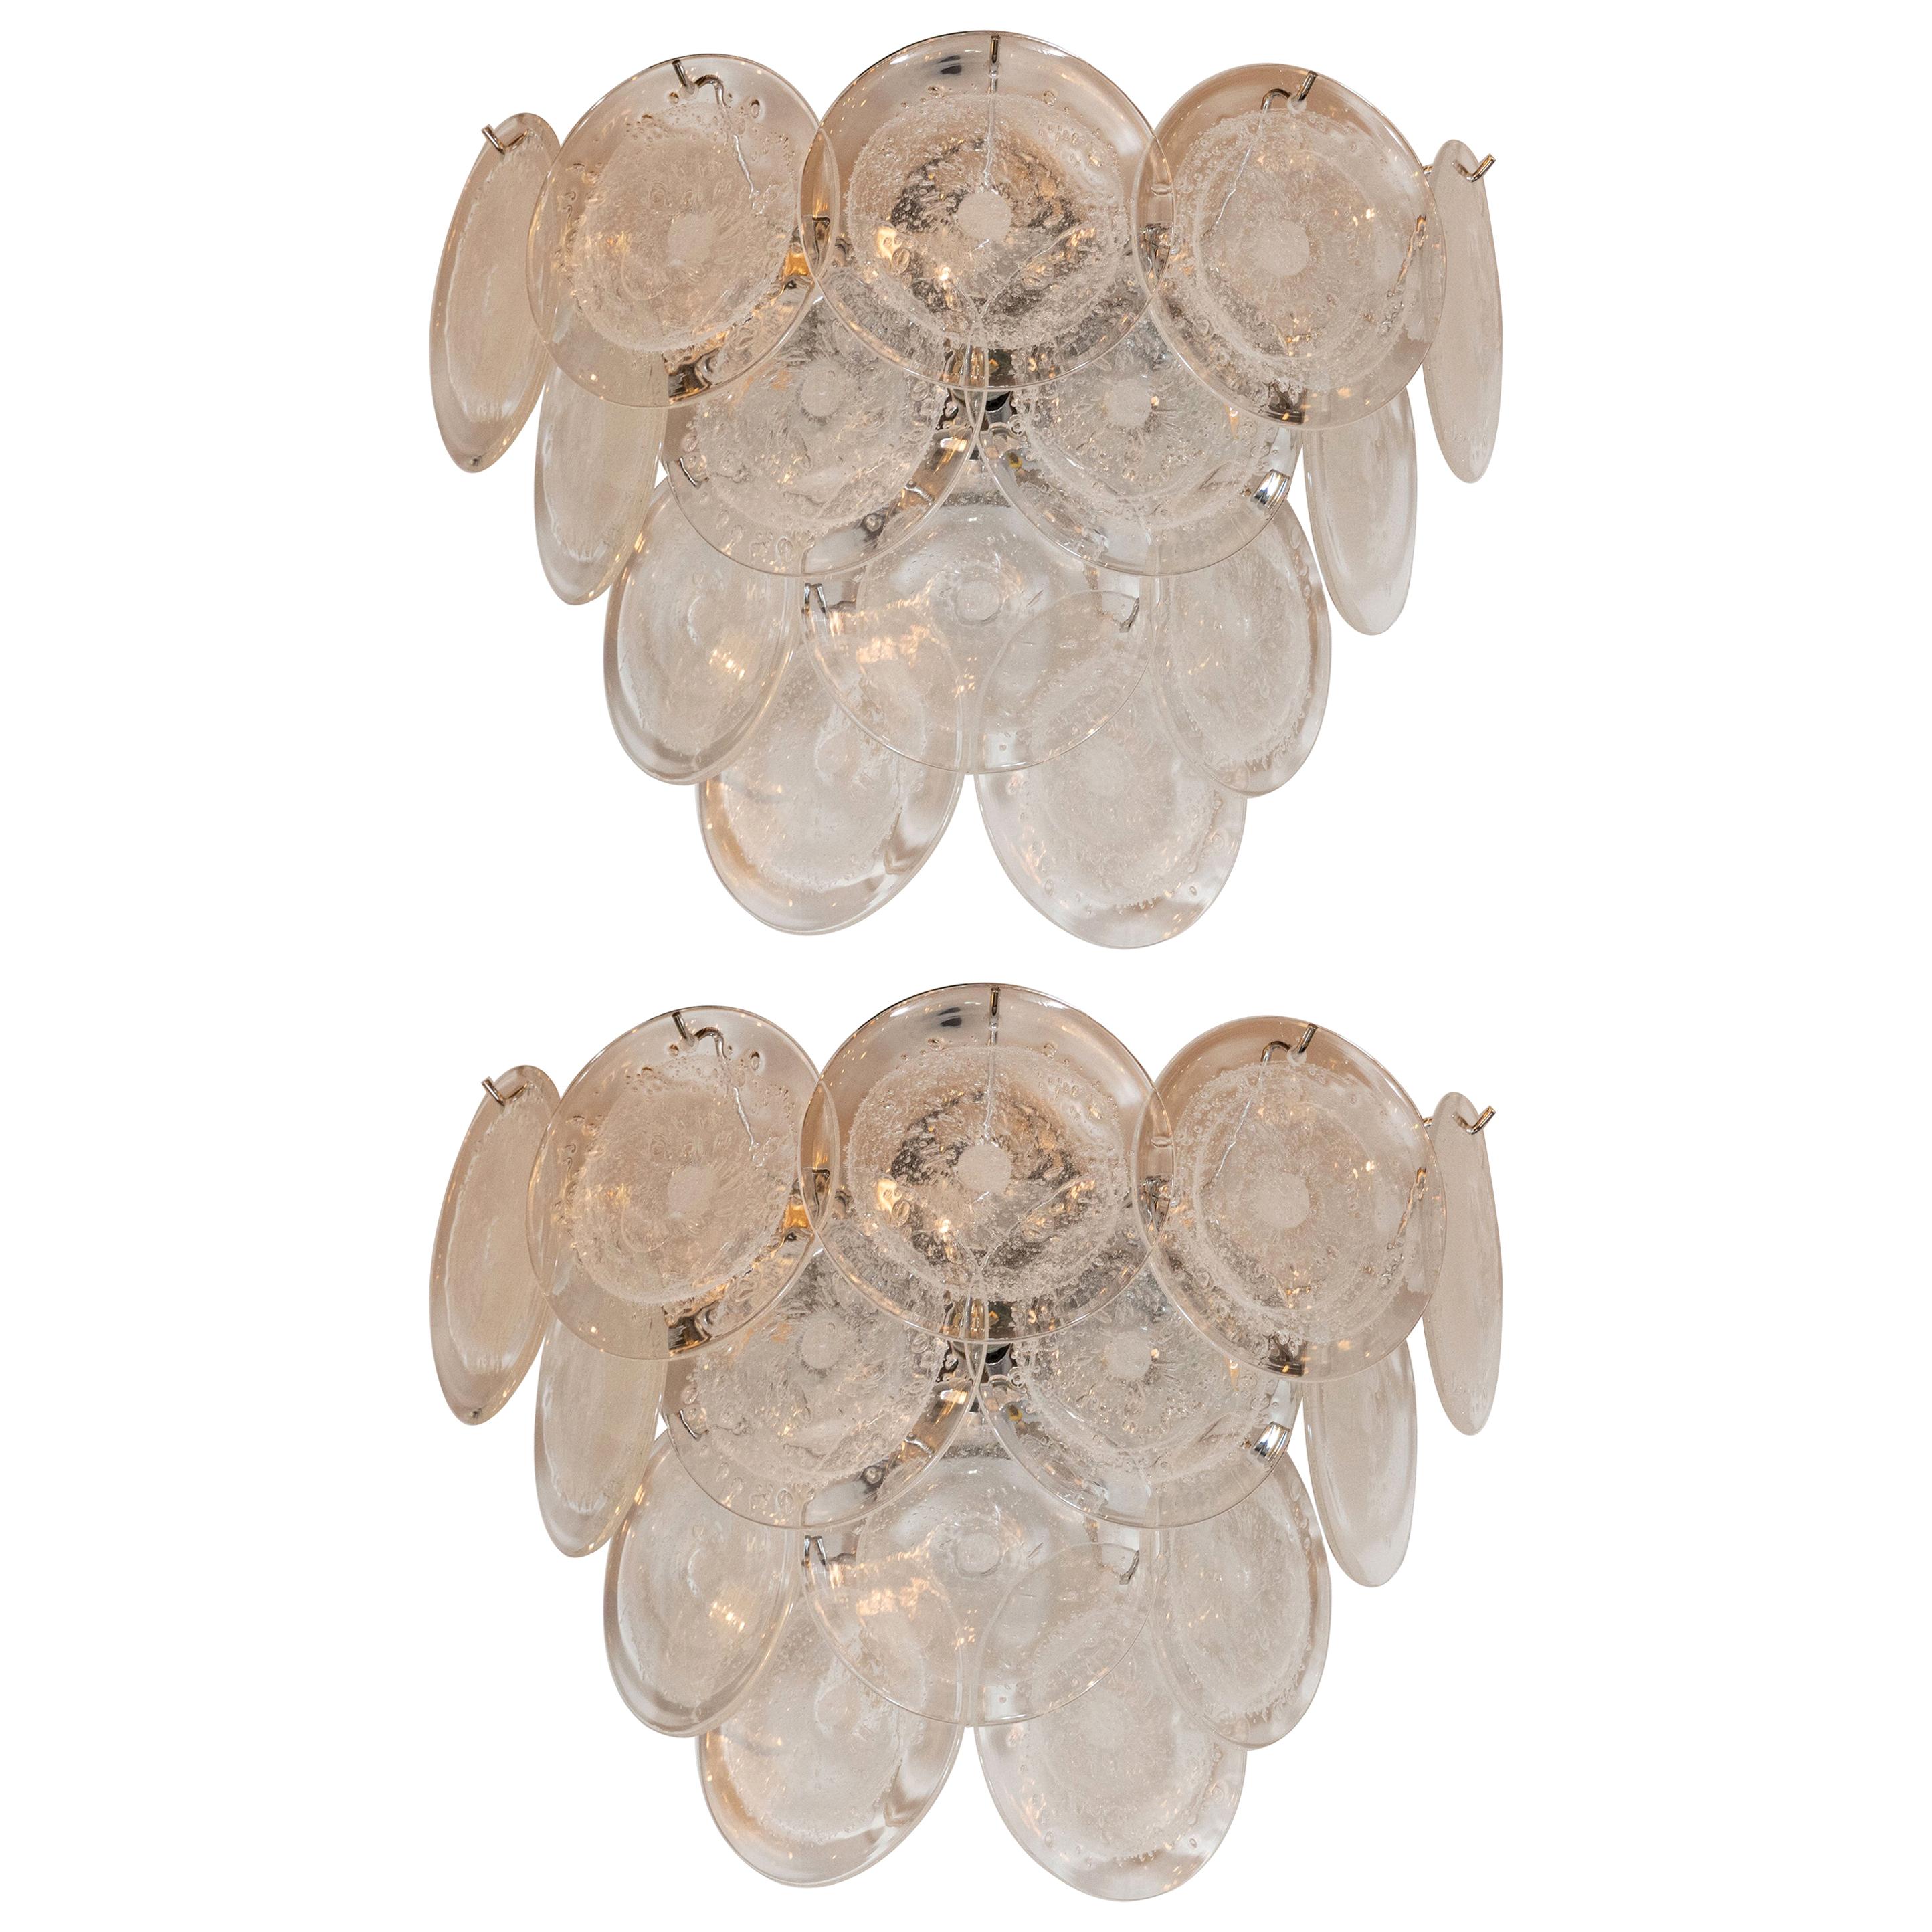 Pair of Modernist 14-Disc Sconces in Handblown Murano Clear Glass